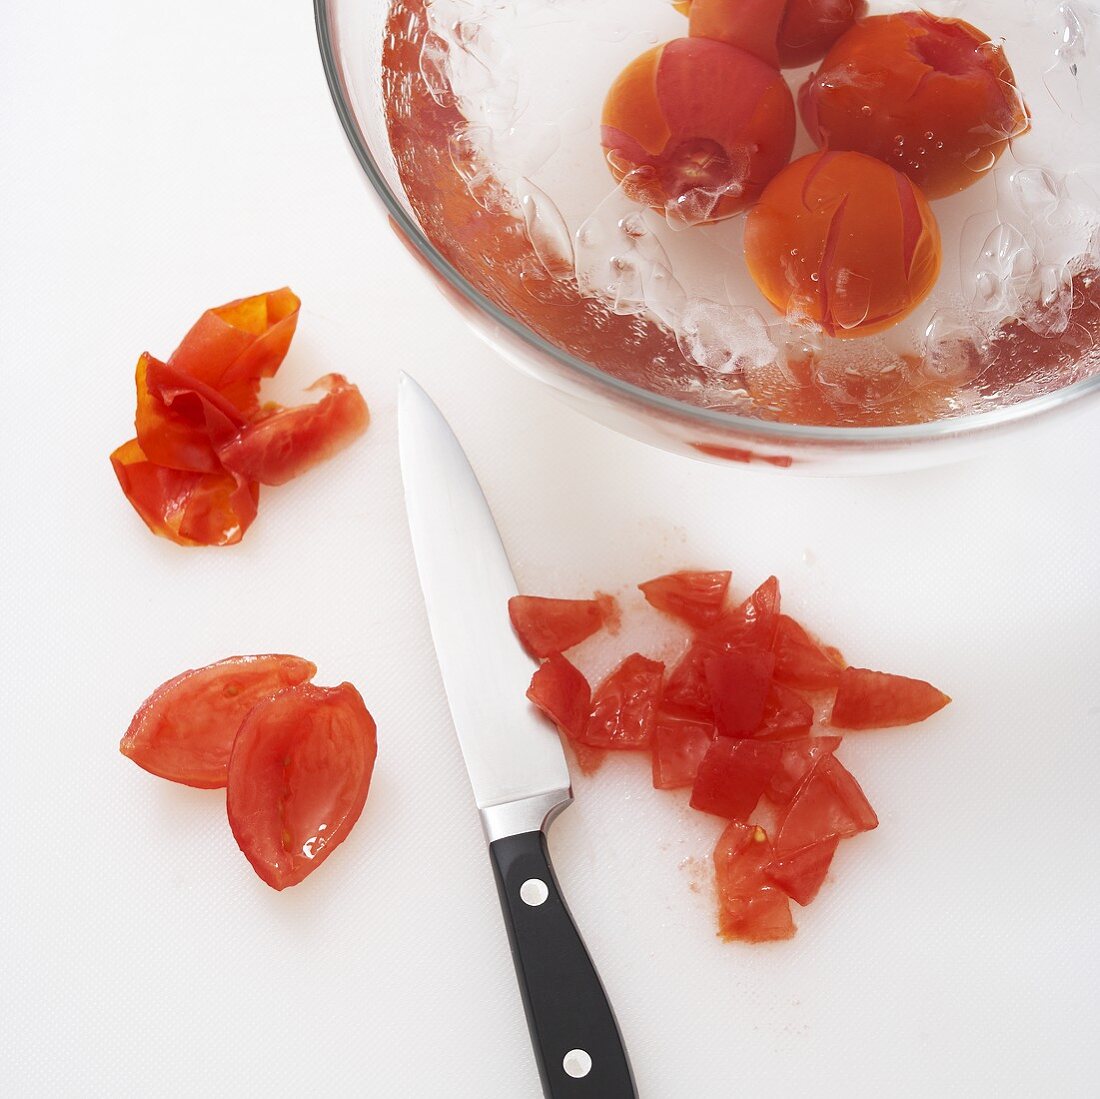 Dicing blanched tomatoes